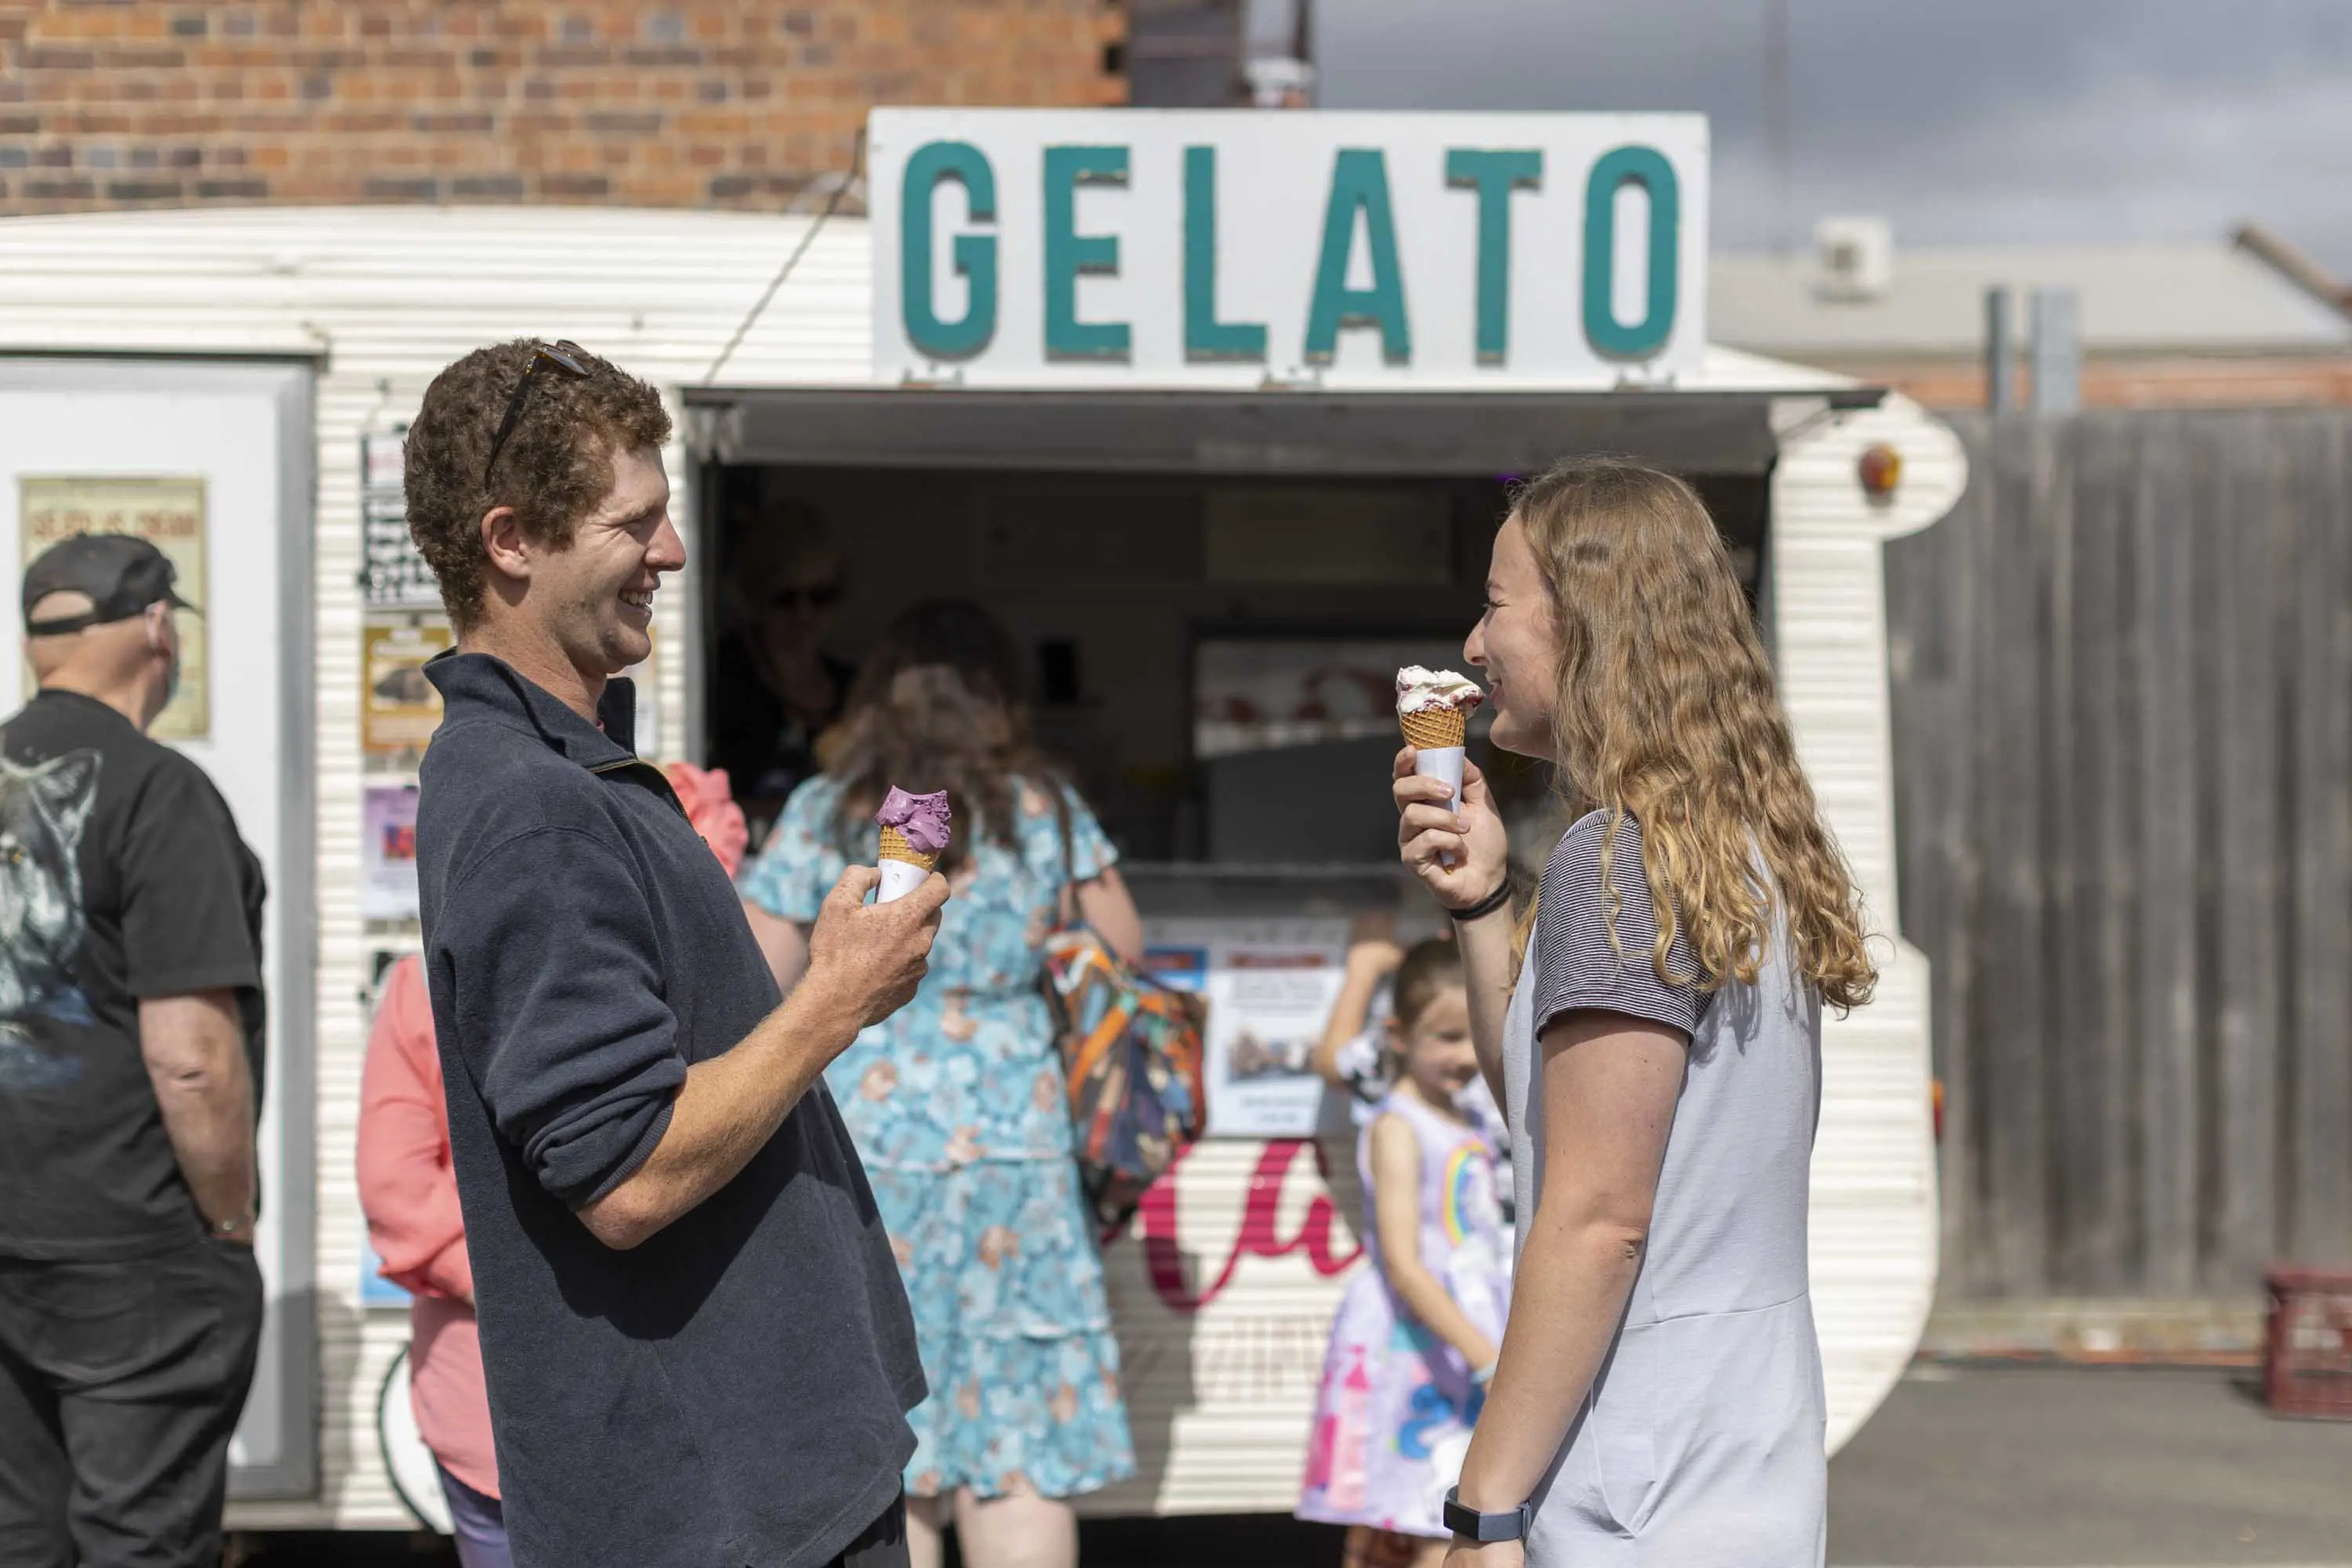 A young couple stand in front of a caravan that has been converted into a Gelato stand.